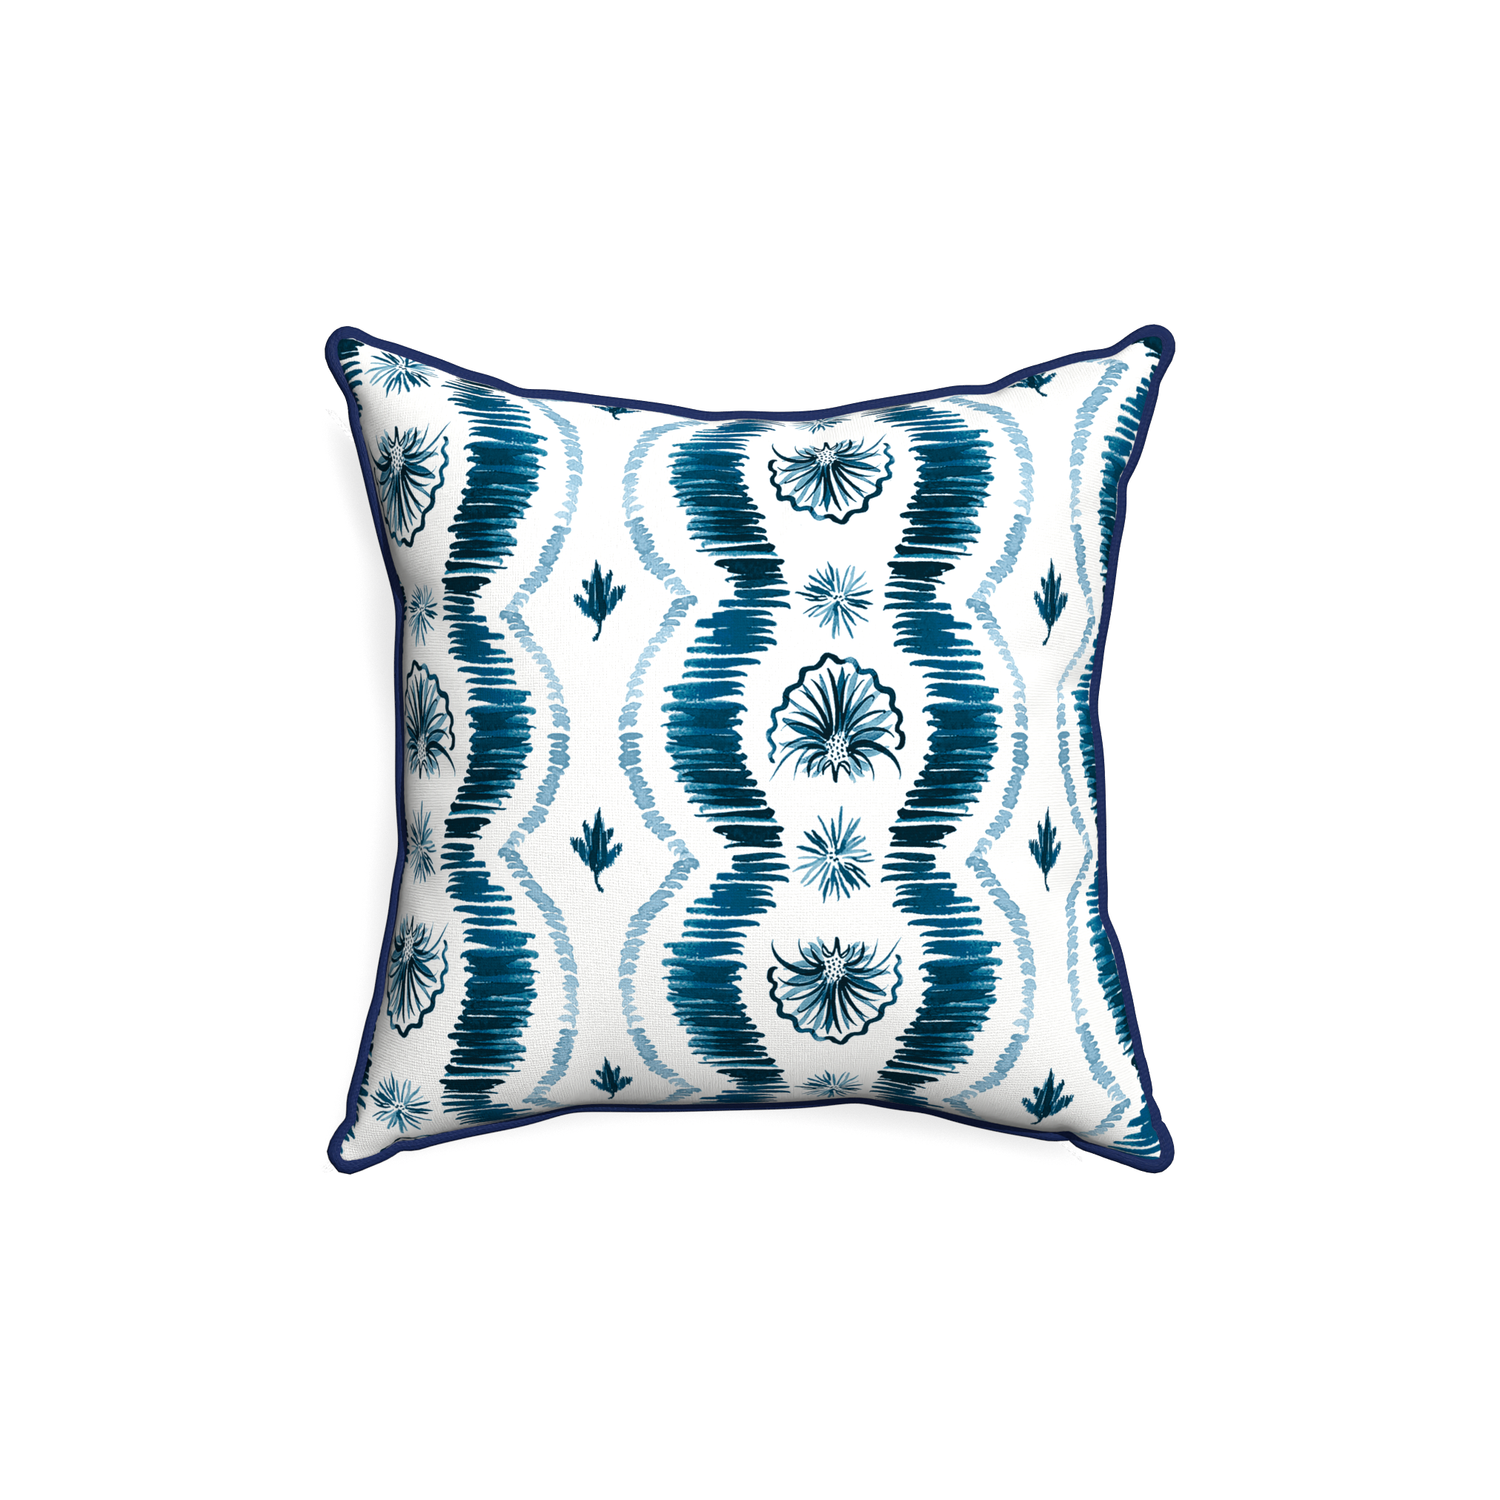 18-square alice custom blue ikatpillow with midnight piping on white background